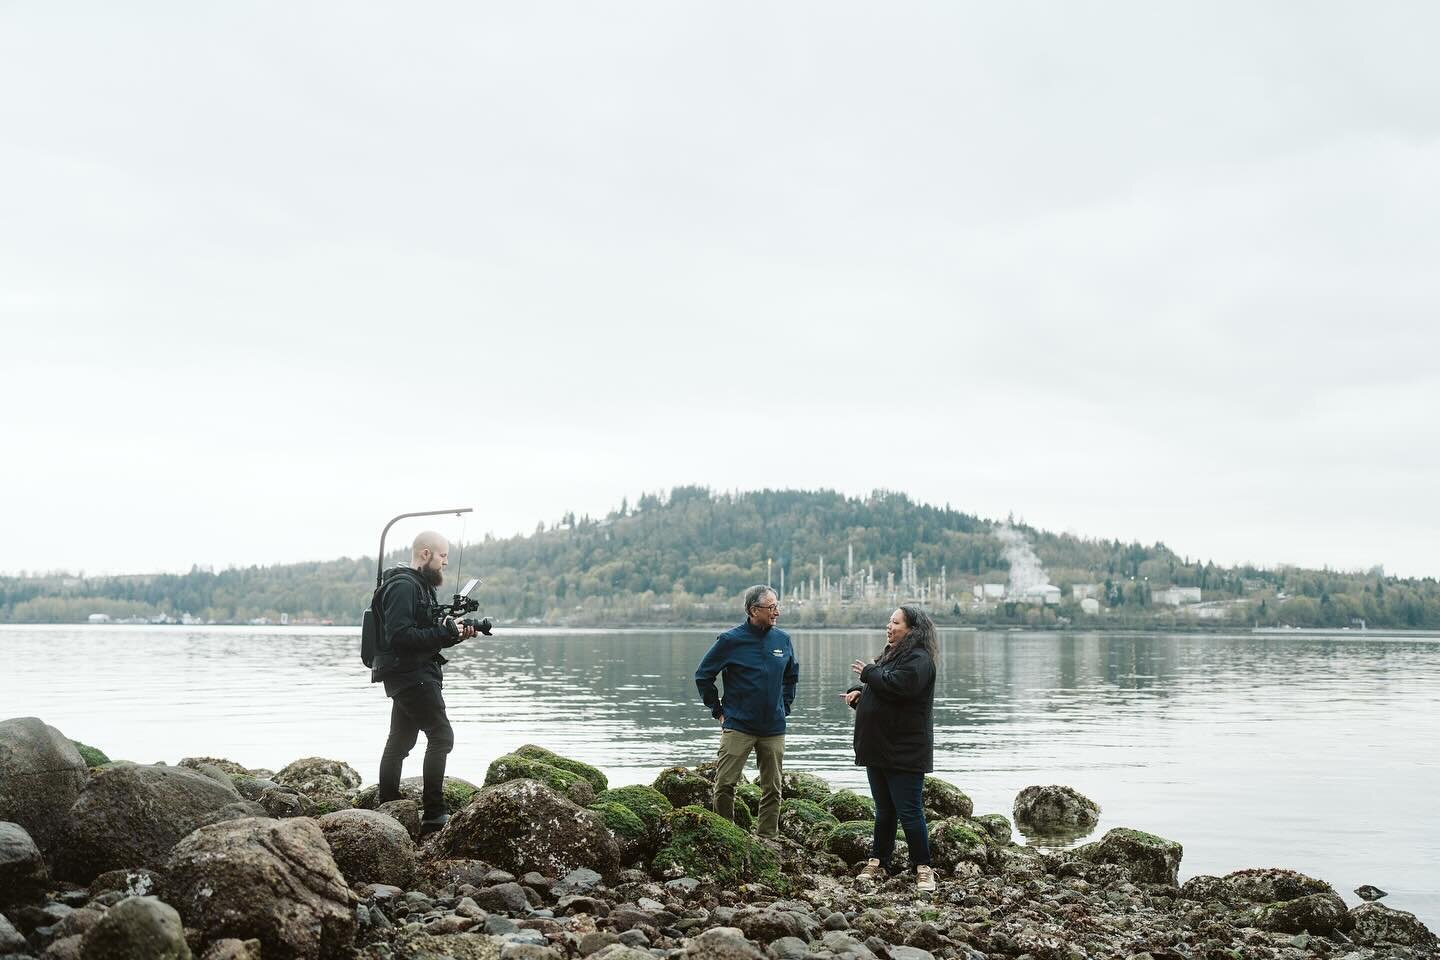 A little BTS of our shoot yesterday with @pacificsalmonfoundation for their upcoming Vancouver gala. We spent our time with Michelle from the Tsleil-Waututh Nation, learning the importance of salmon to her community and how climate change is affectin